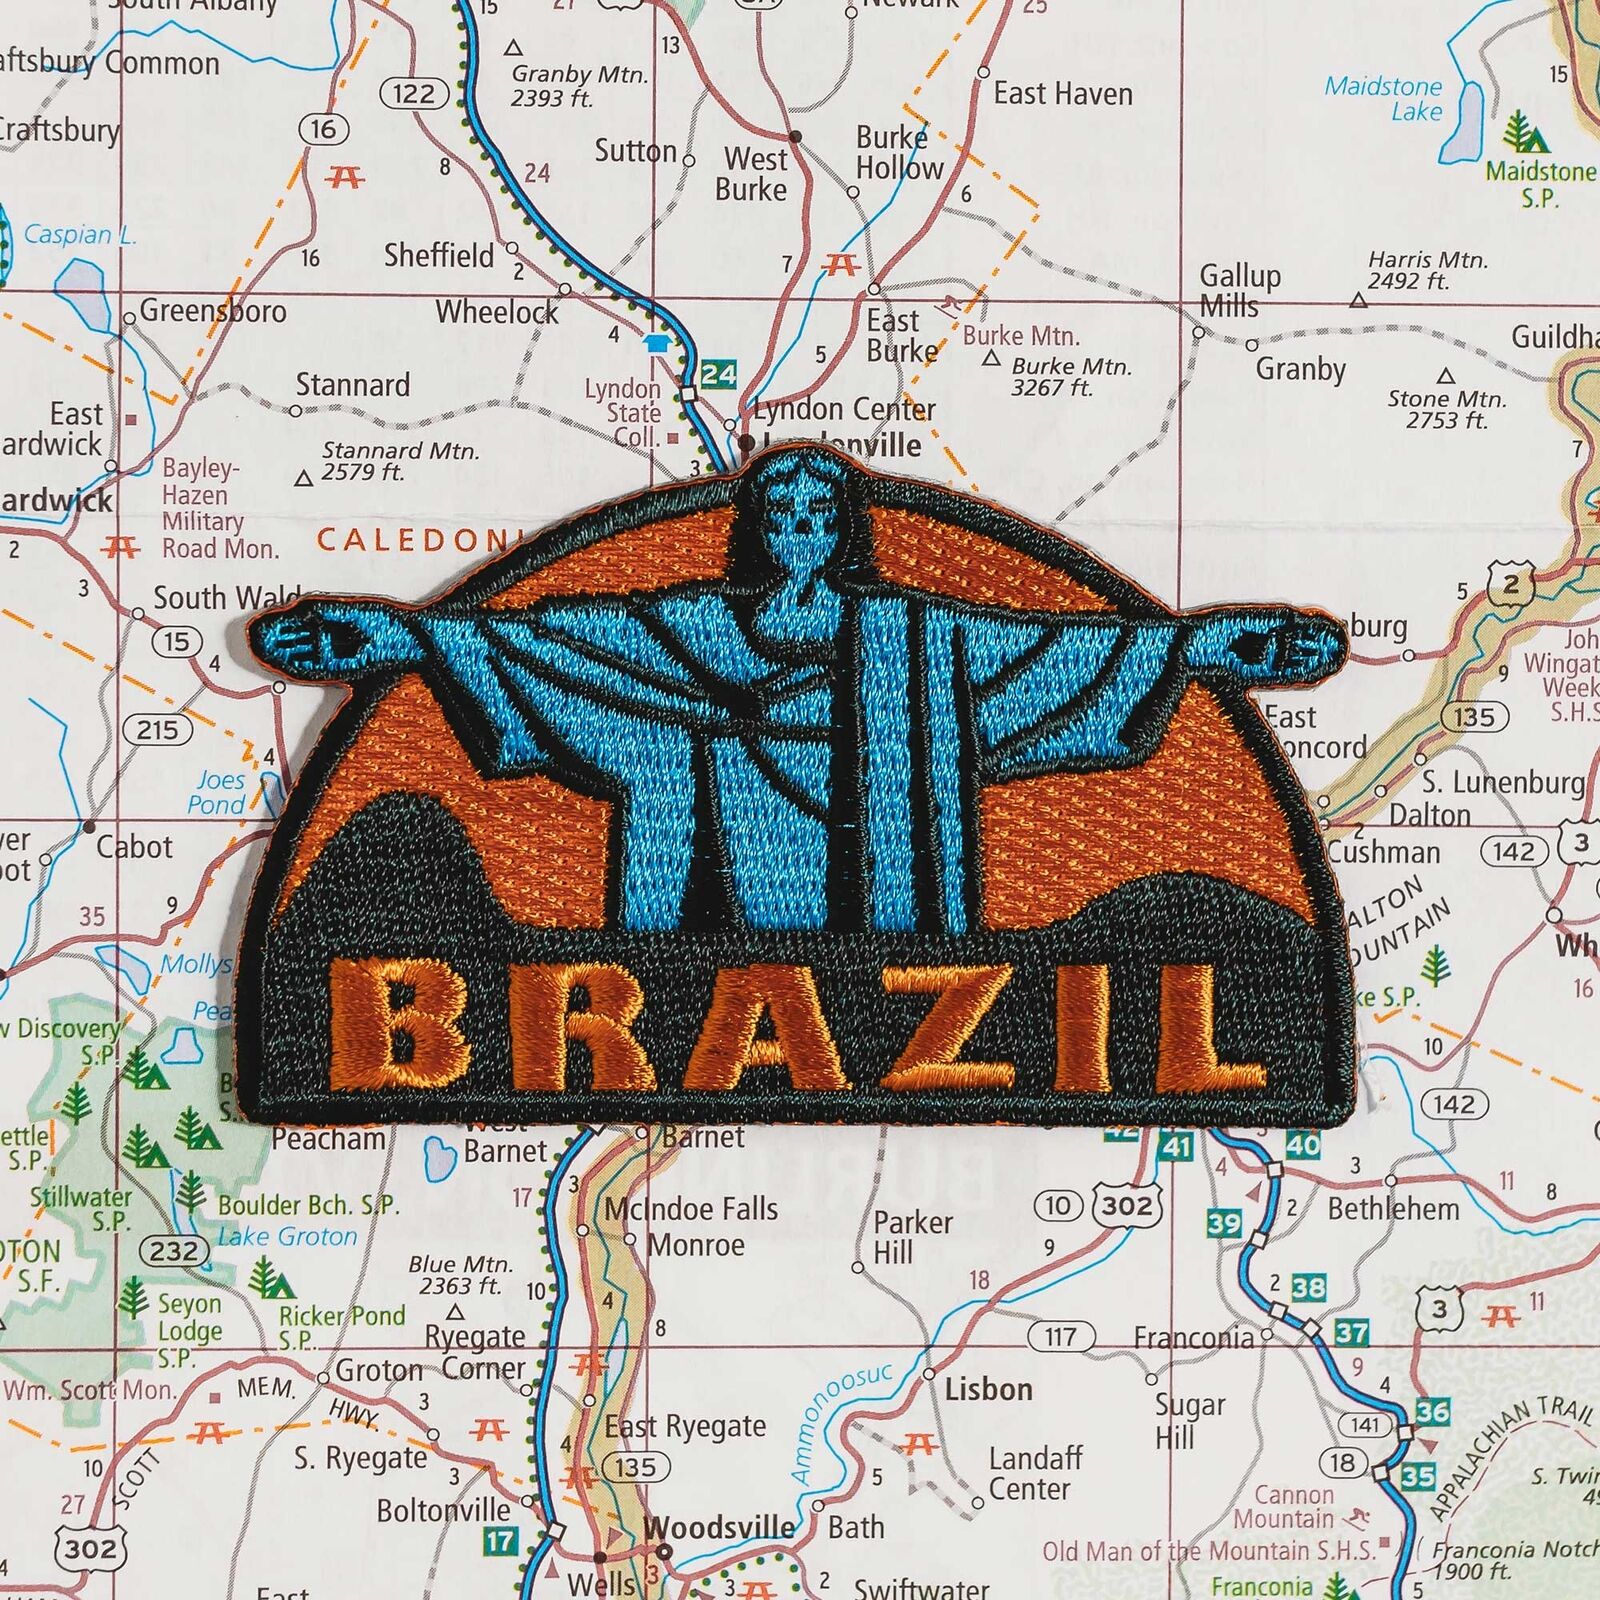 Brazil Iron on Travel Patch - Great Souvenir or Gift for travellers